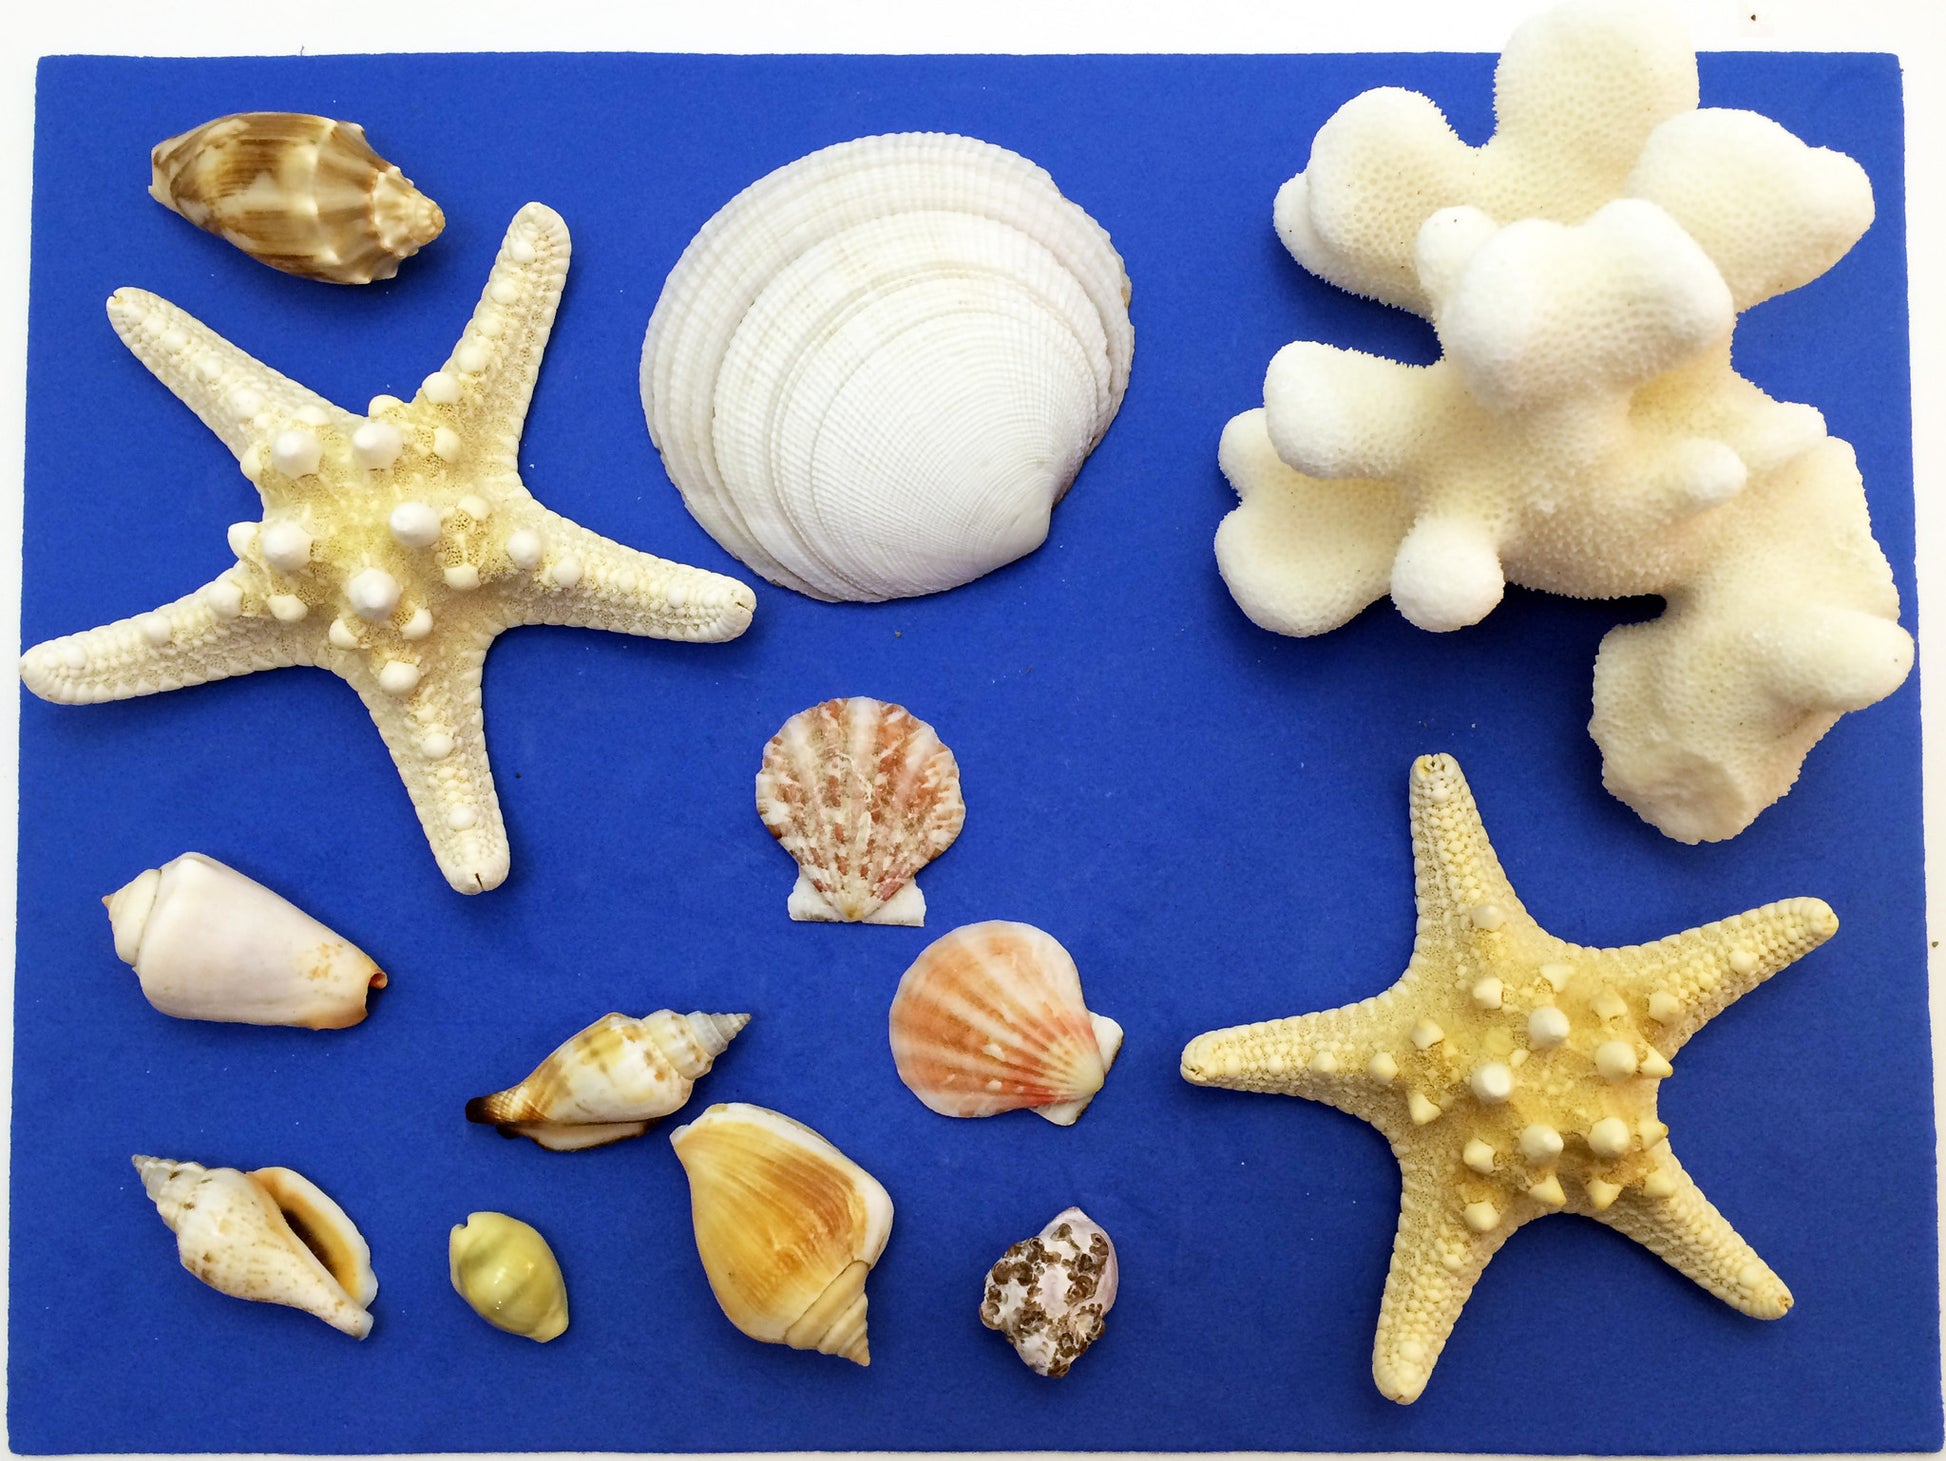 Science activity inspired by the book Over in an Ocean in a Coral Reef. Exploring starfish, coral, and seashells.